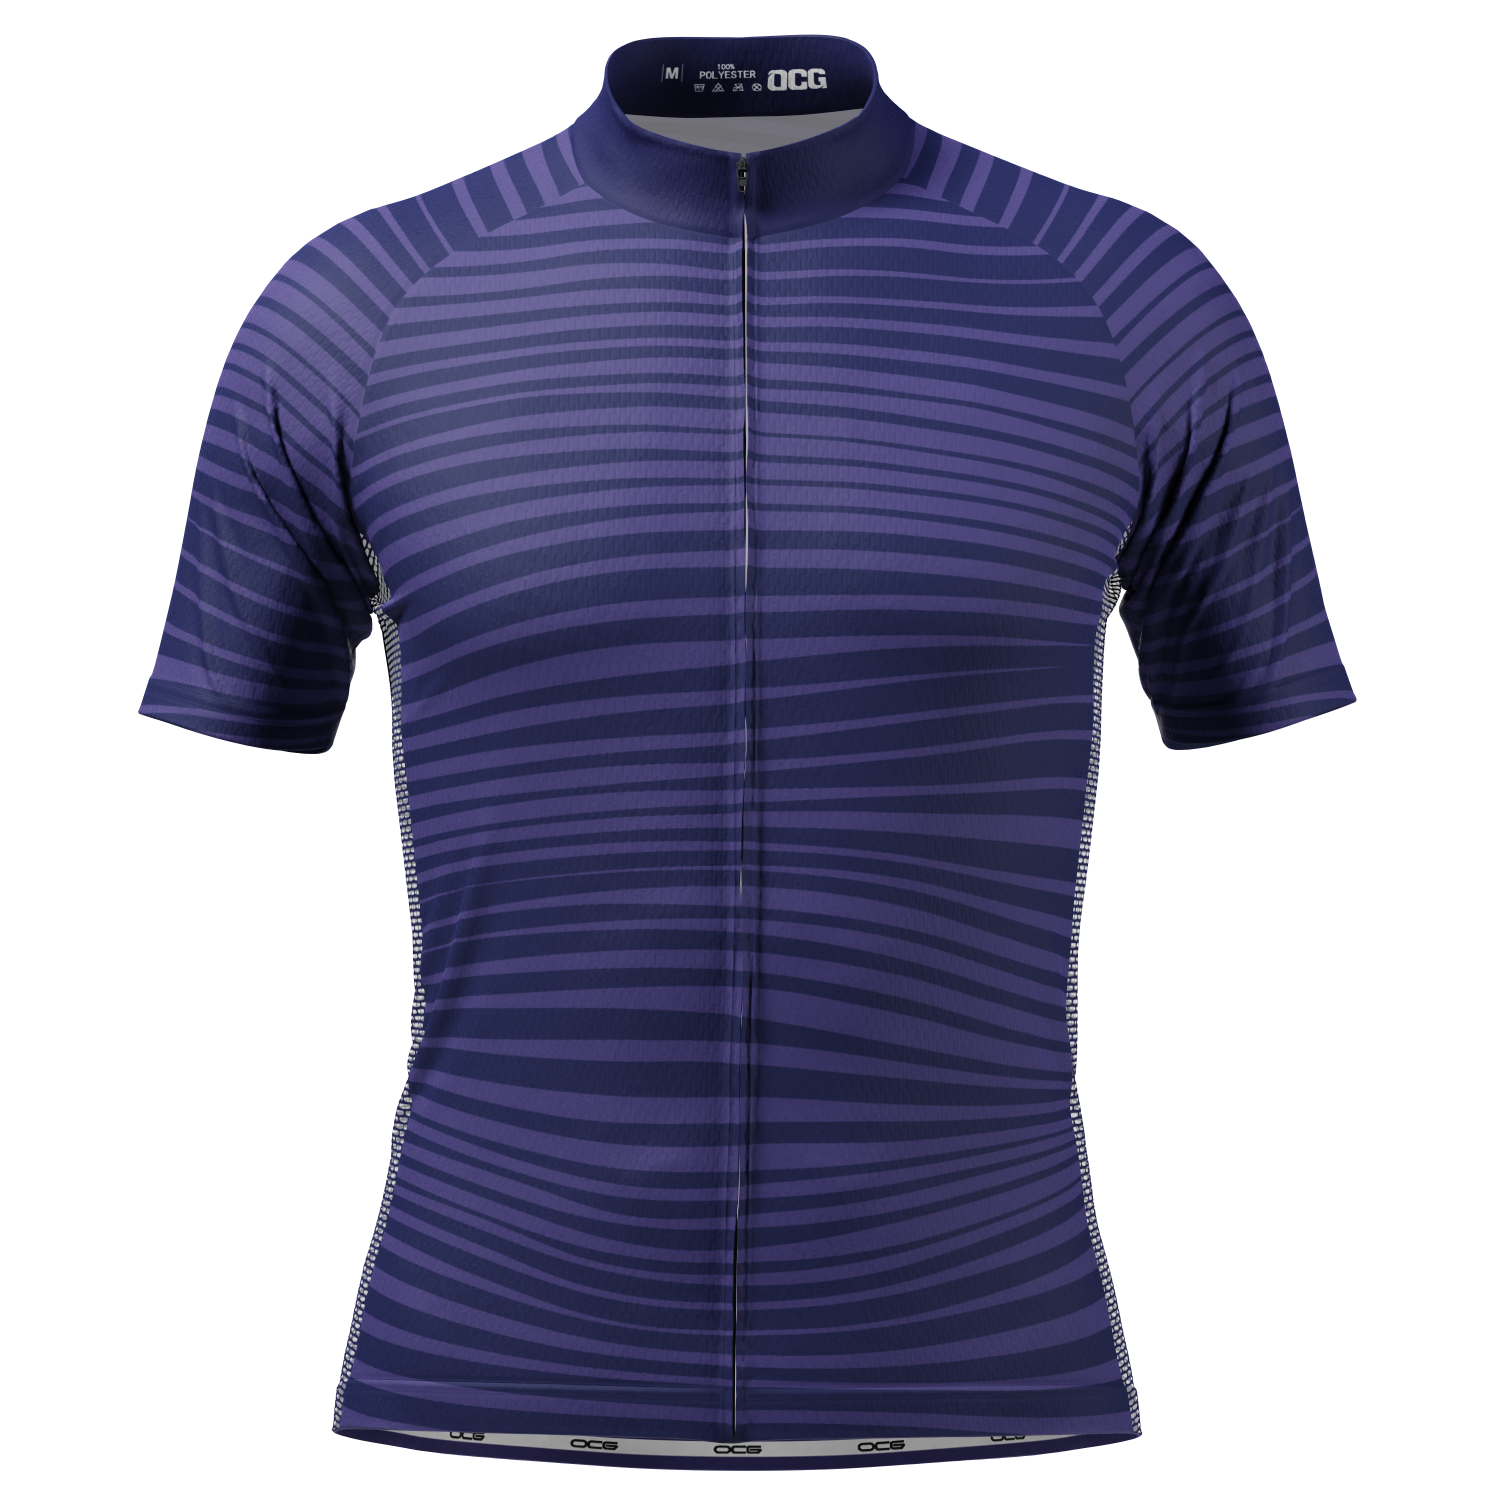 Men's Earthbound Stripes Short Sleeve Cycling Jersey